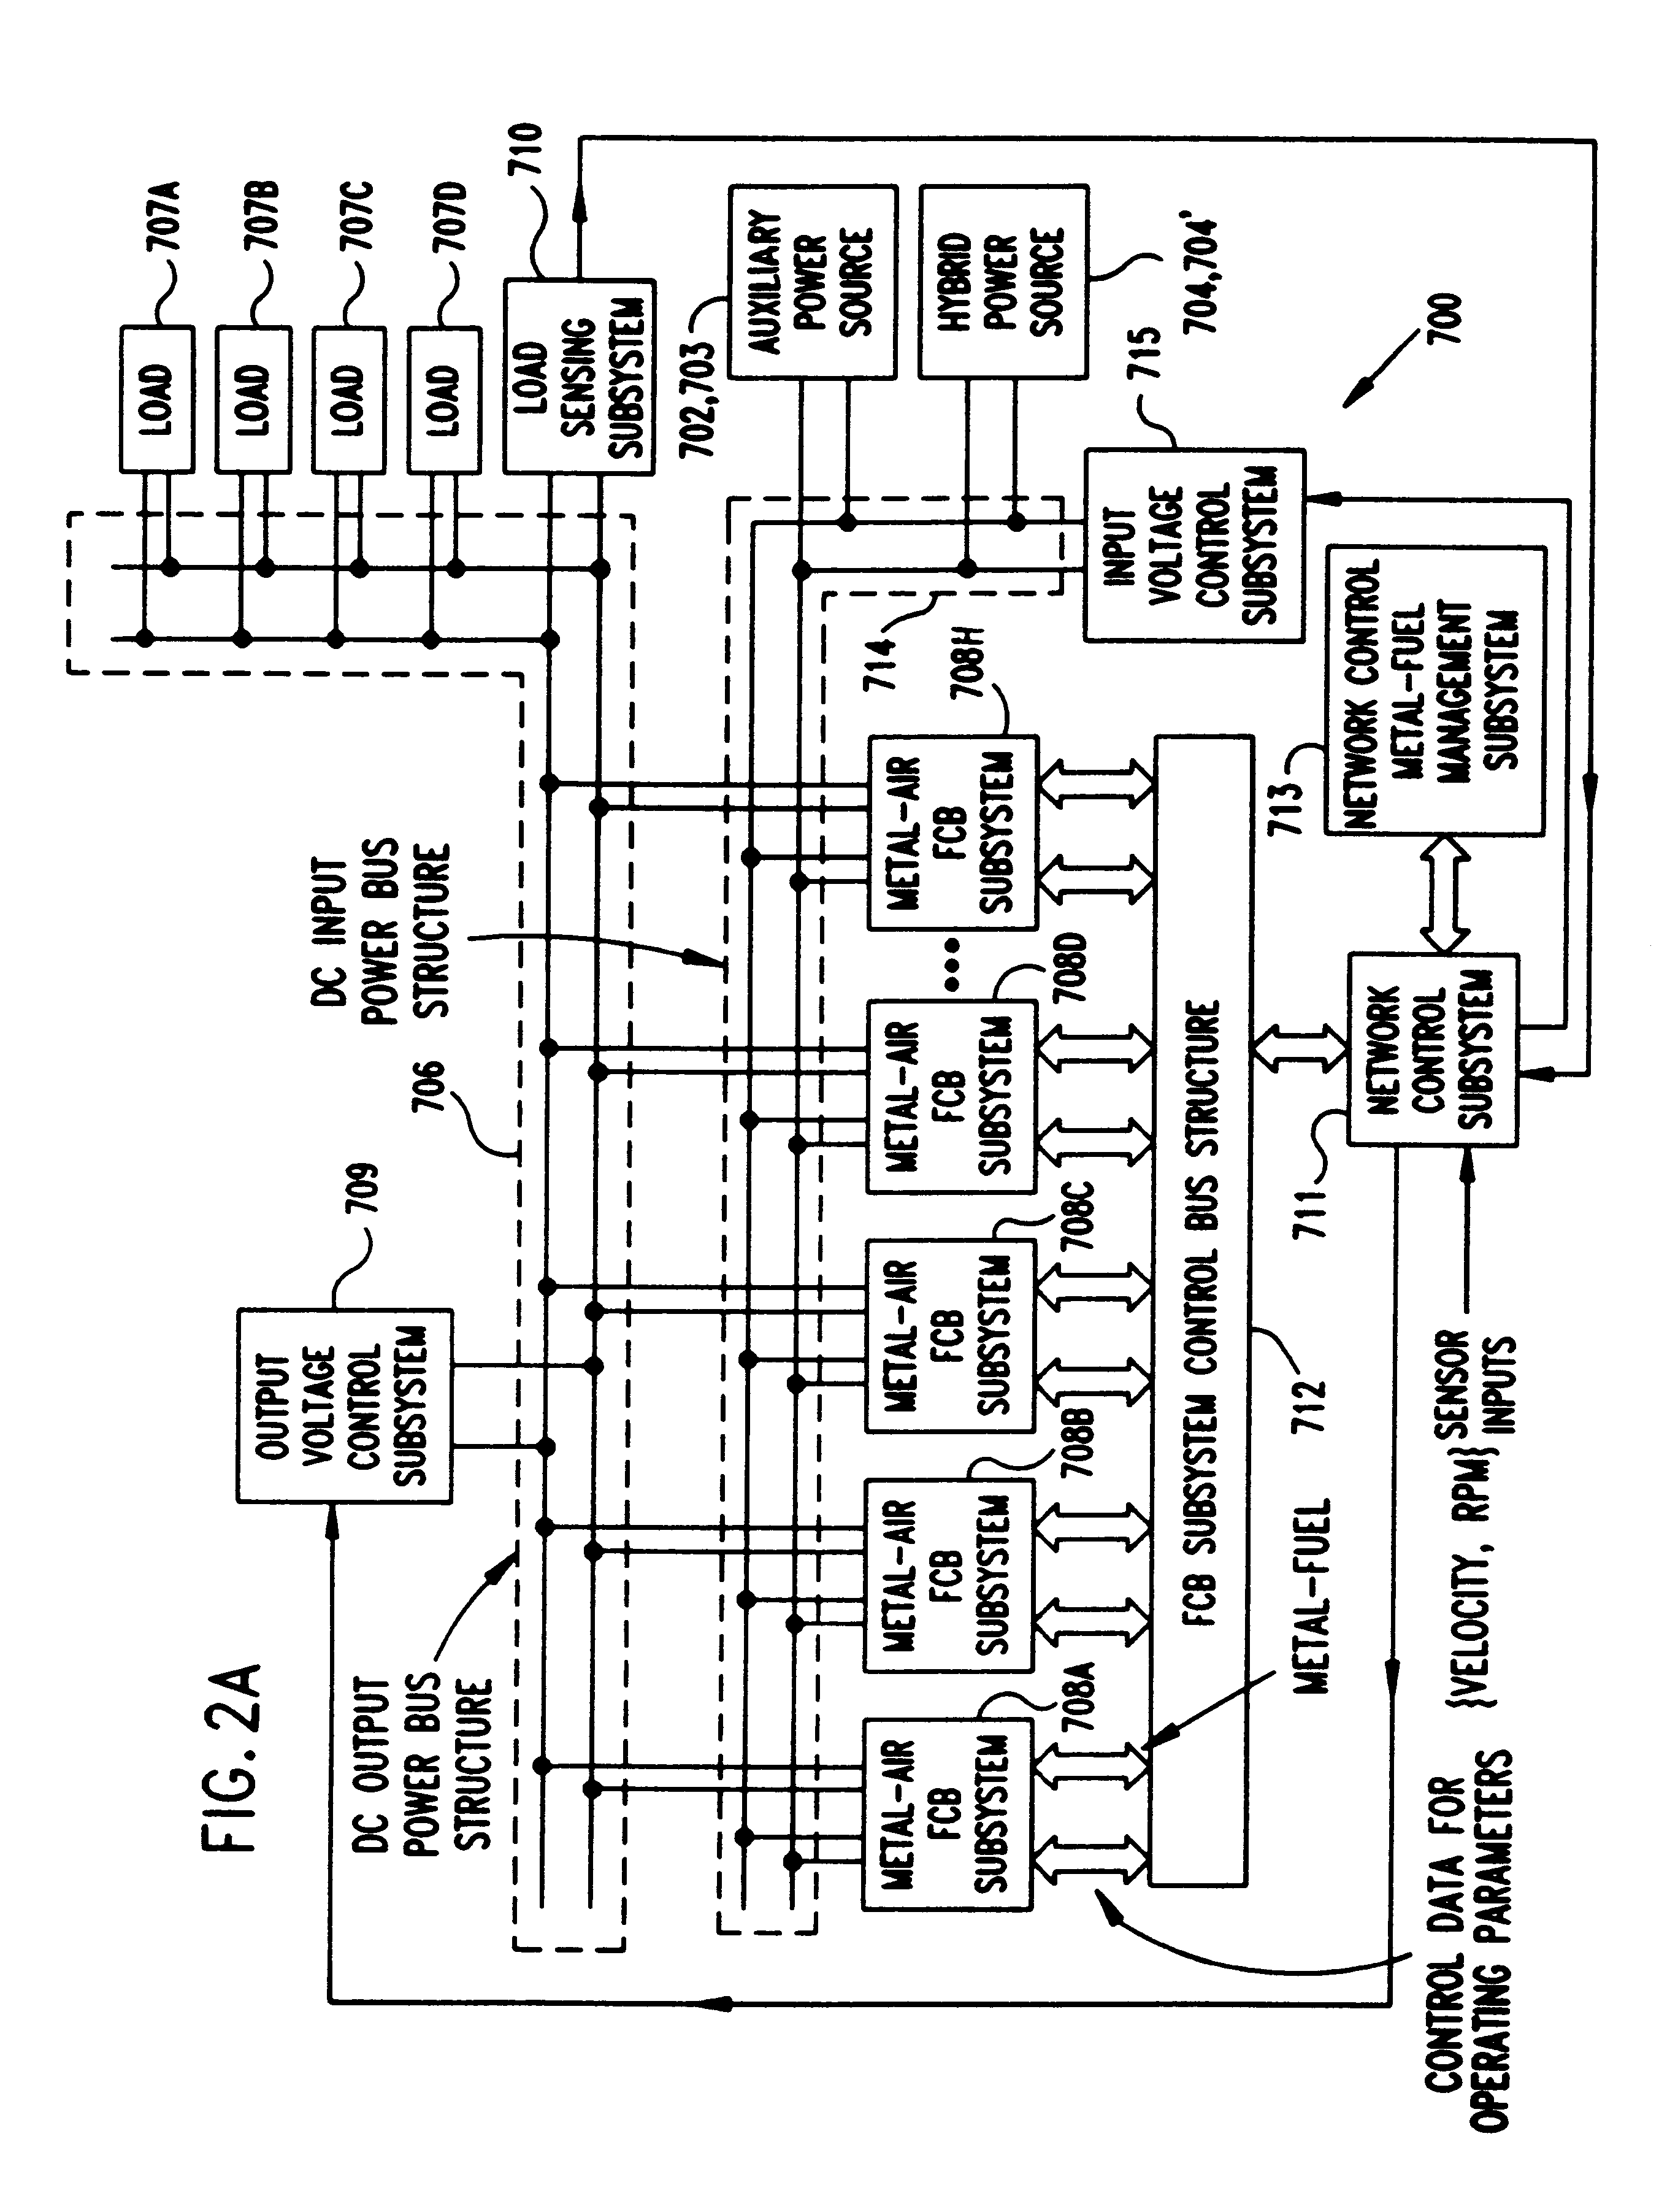 Electrical power generation system having means for managing the discharging and recharging of metal fuel contained within a network of metal-air fuel cell battery subsystems